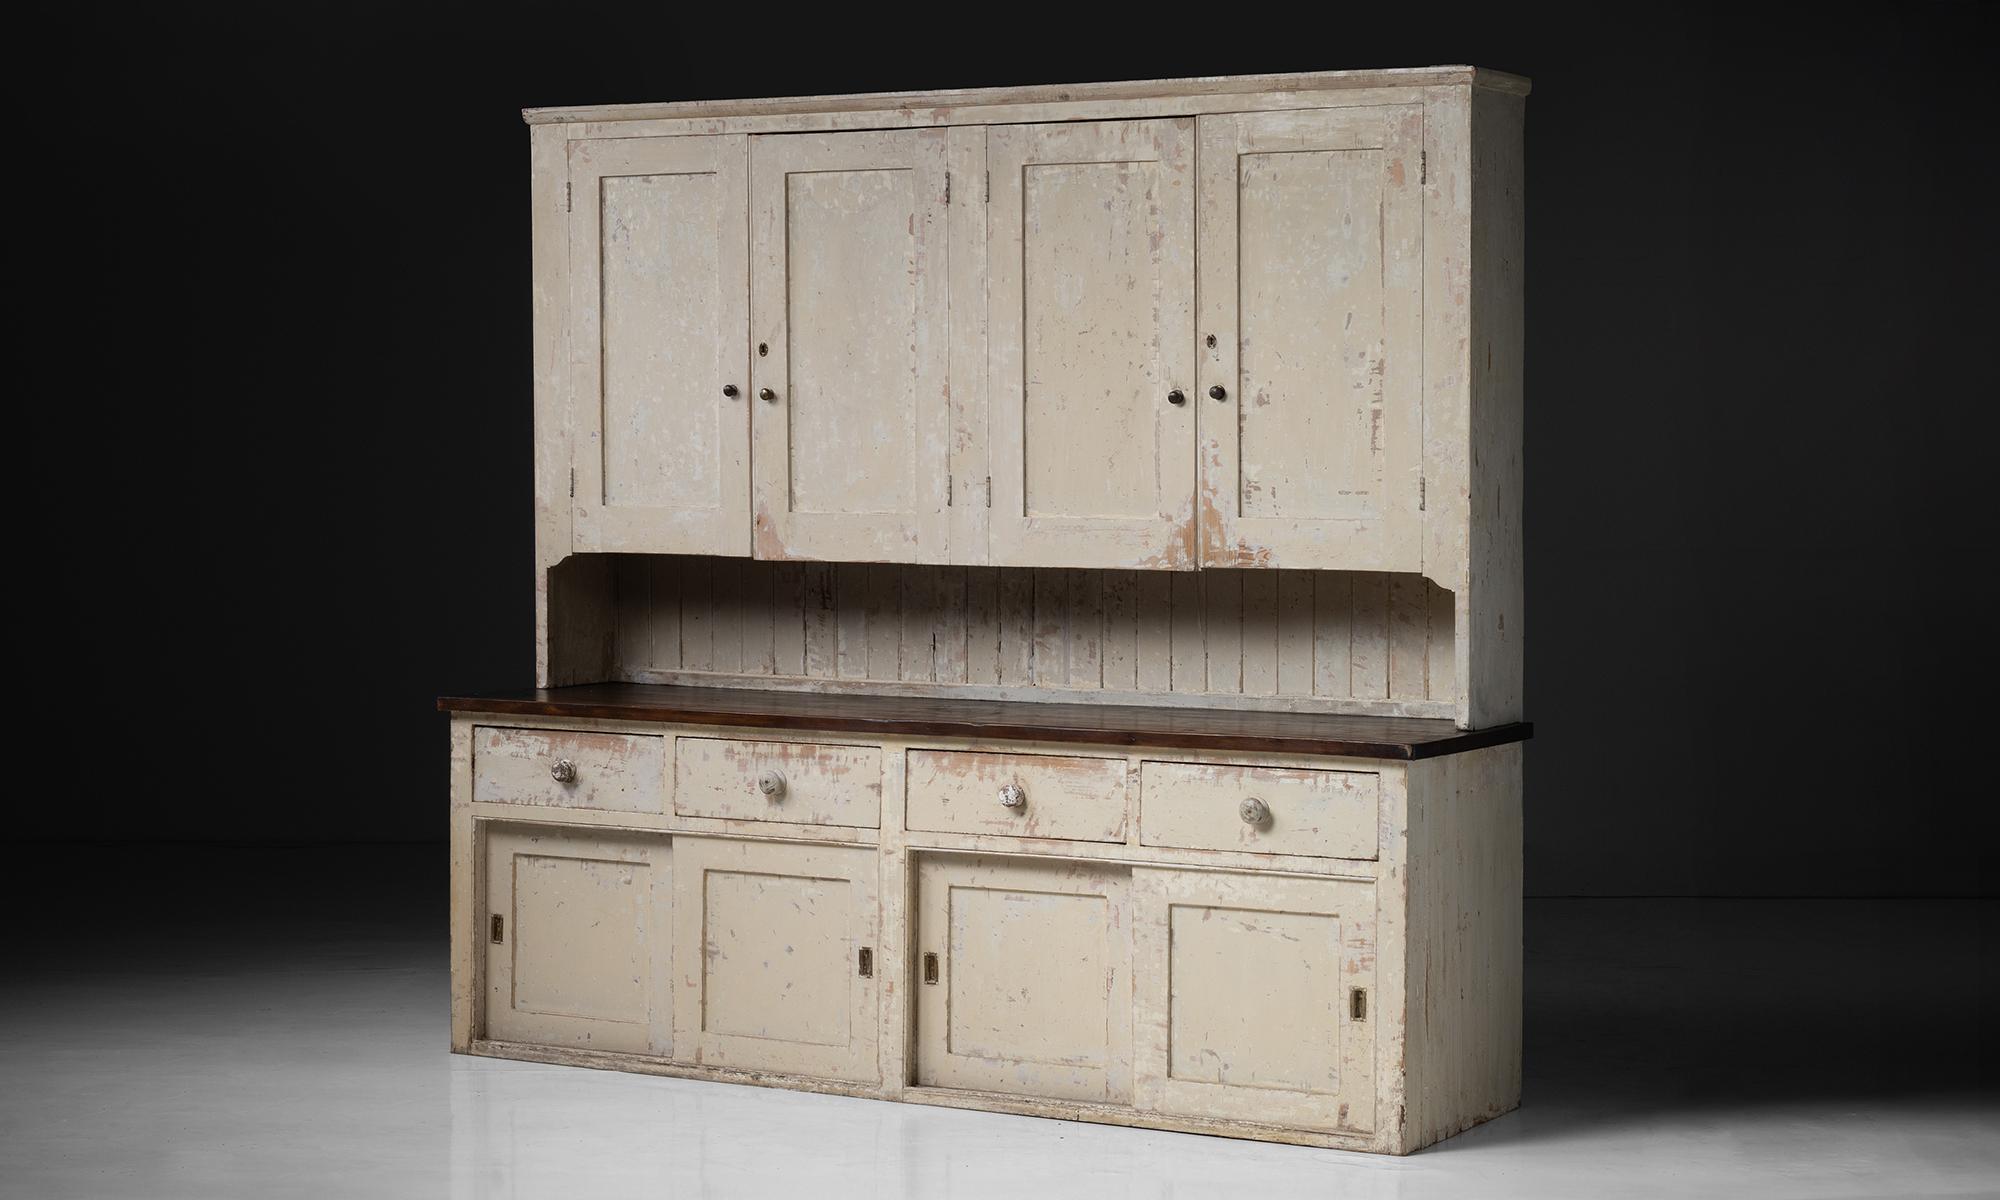 Massive Housekeepers Cupboard

England circa 1860

Constructed in pine, with original painted surface and stained counter top.

Measures 110.25”L x 30”d x 100”h x 37.5” surface height